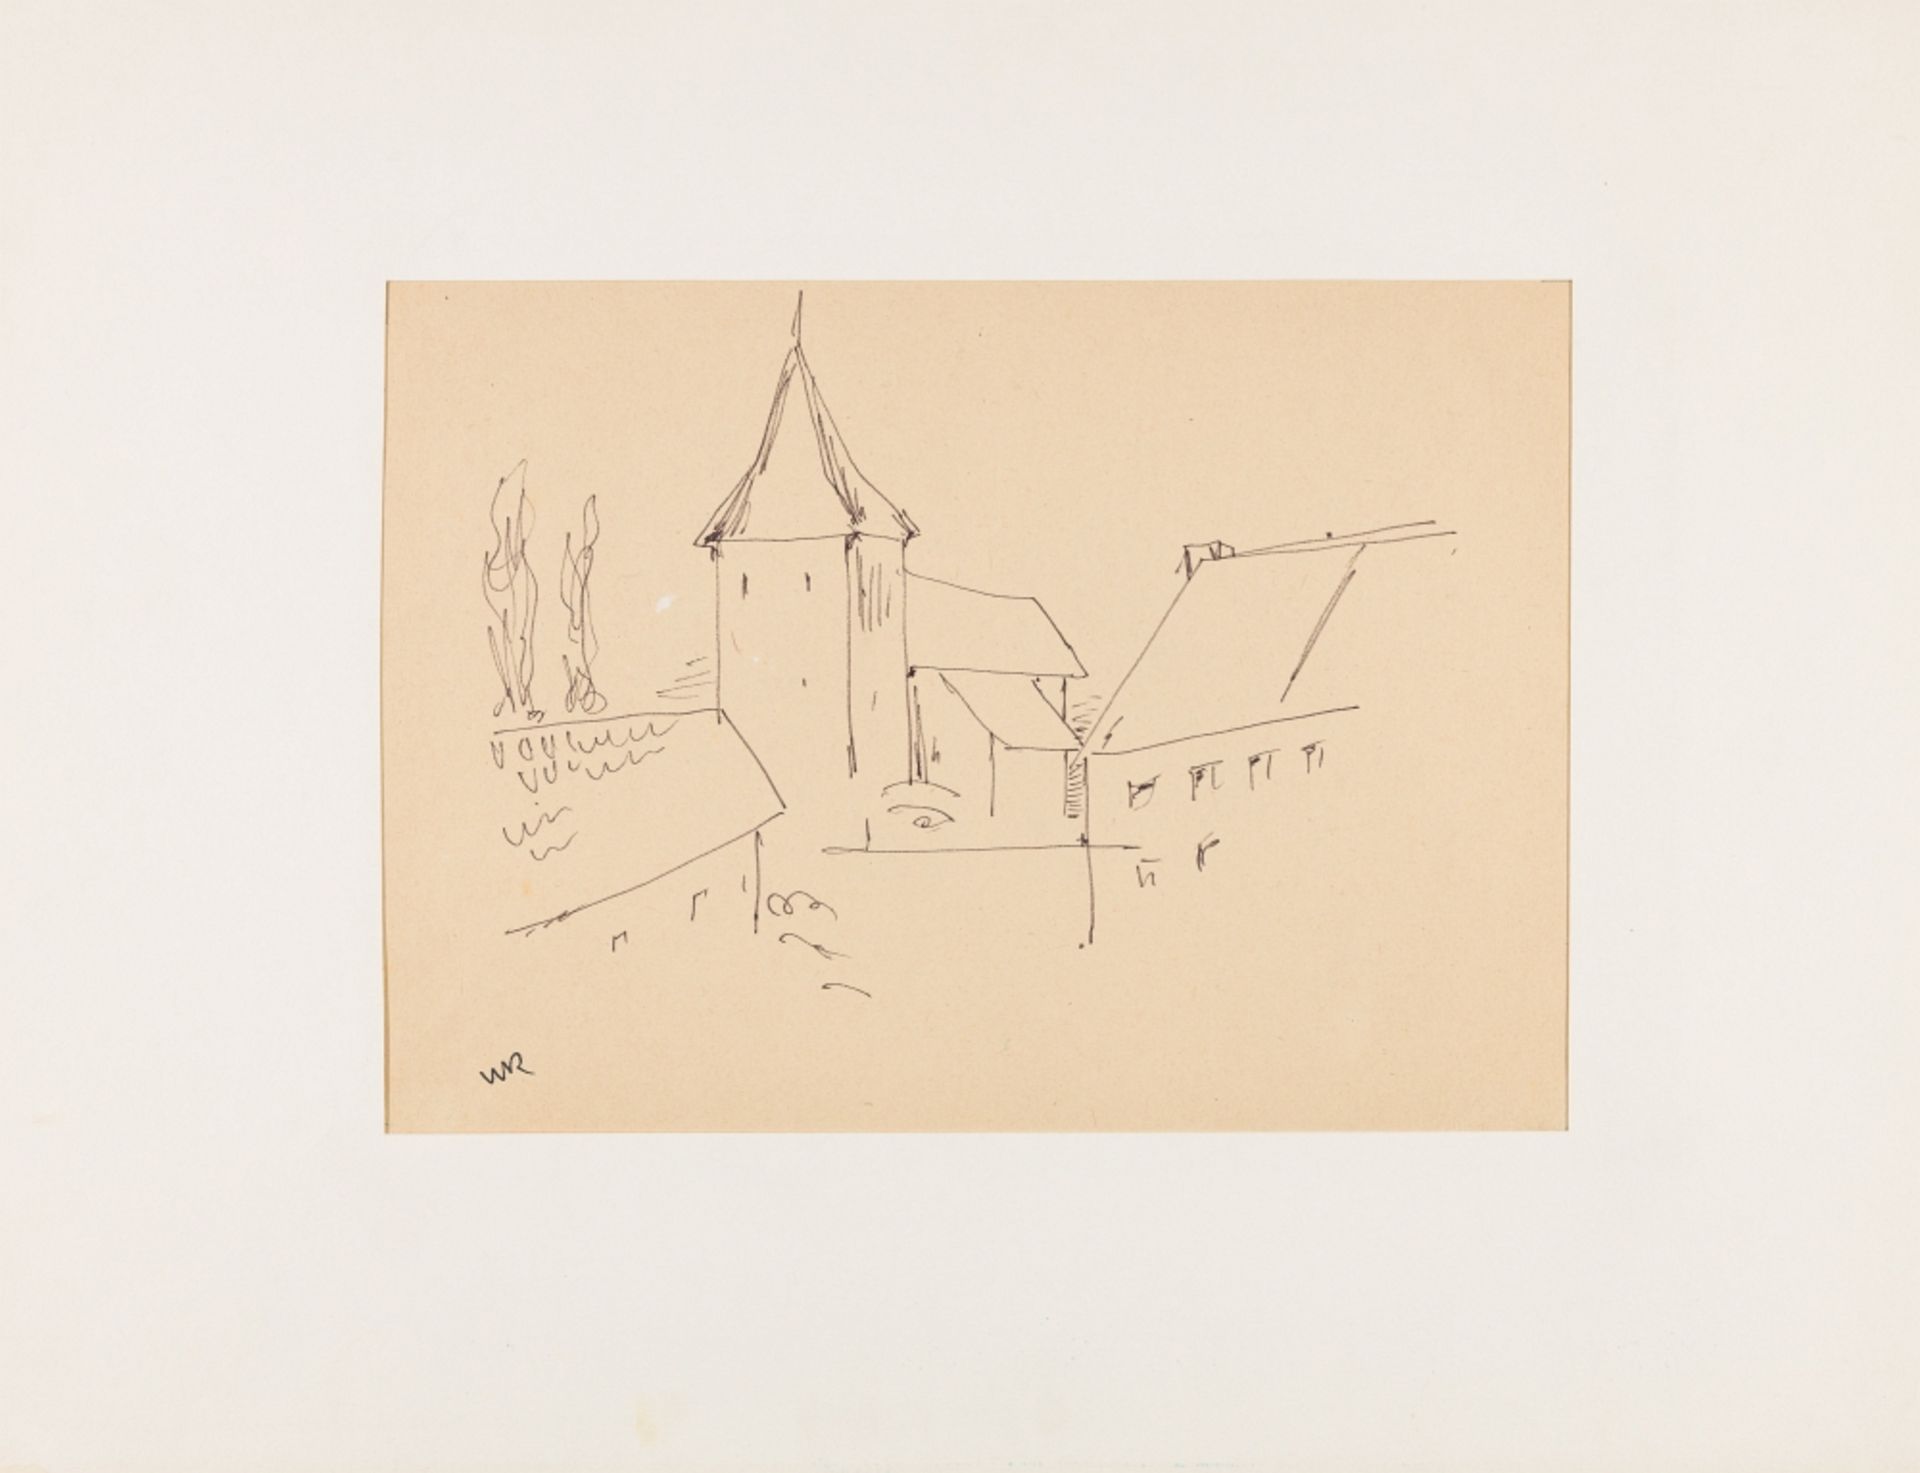 Ritter, Walter(1904-1986)Churchink pen on papermonogrammed lower left12,2 x 17 in - Image 2 of 3